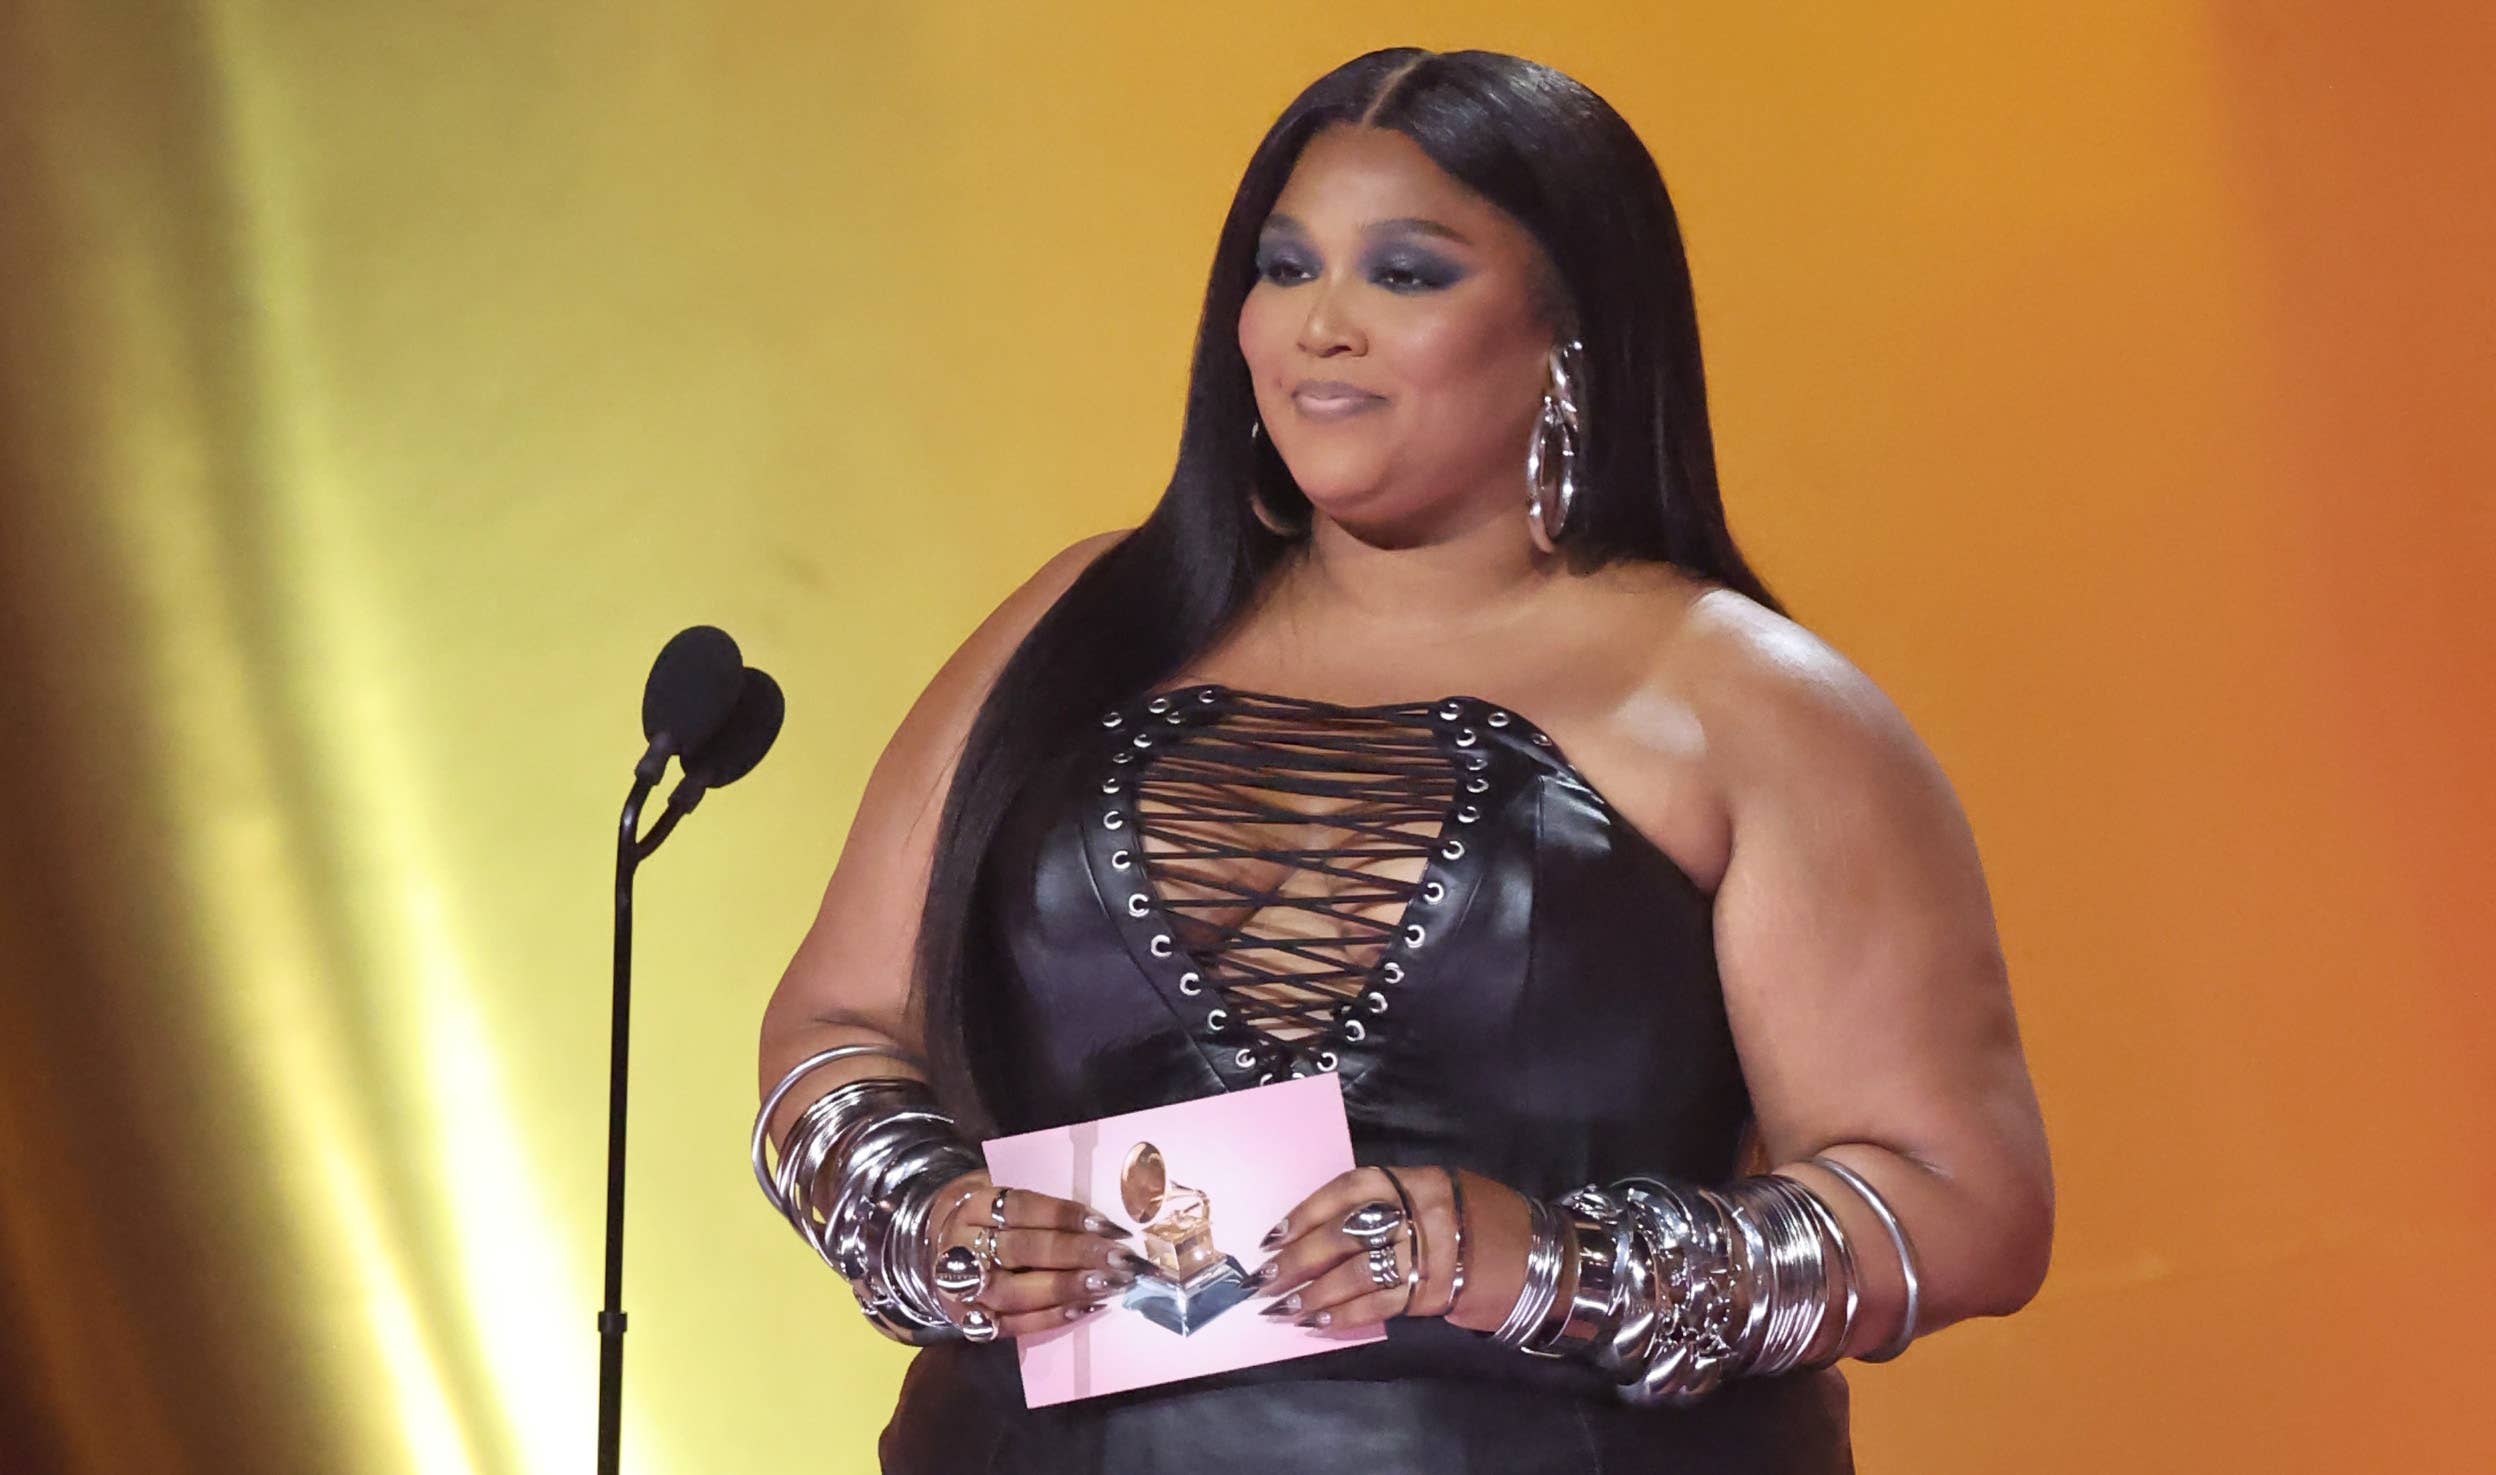 Lizzo Announces She’s Quitting Music: ‘I’m Starting to Feel Like the World Doesn’t Want Me in It’